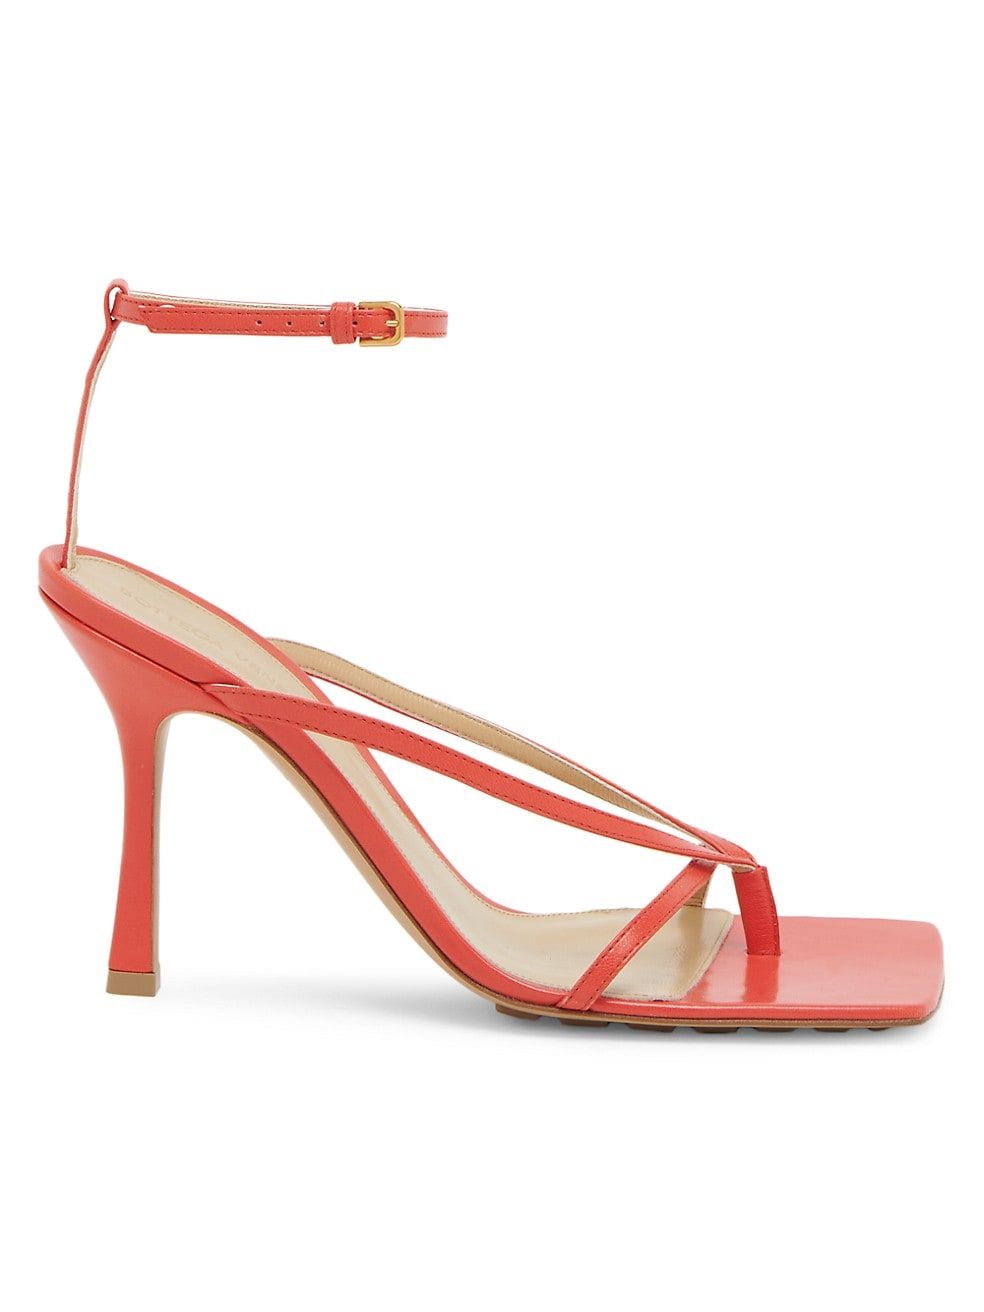 Stretch Leather Sandals | Saks Fifth Avenue